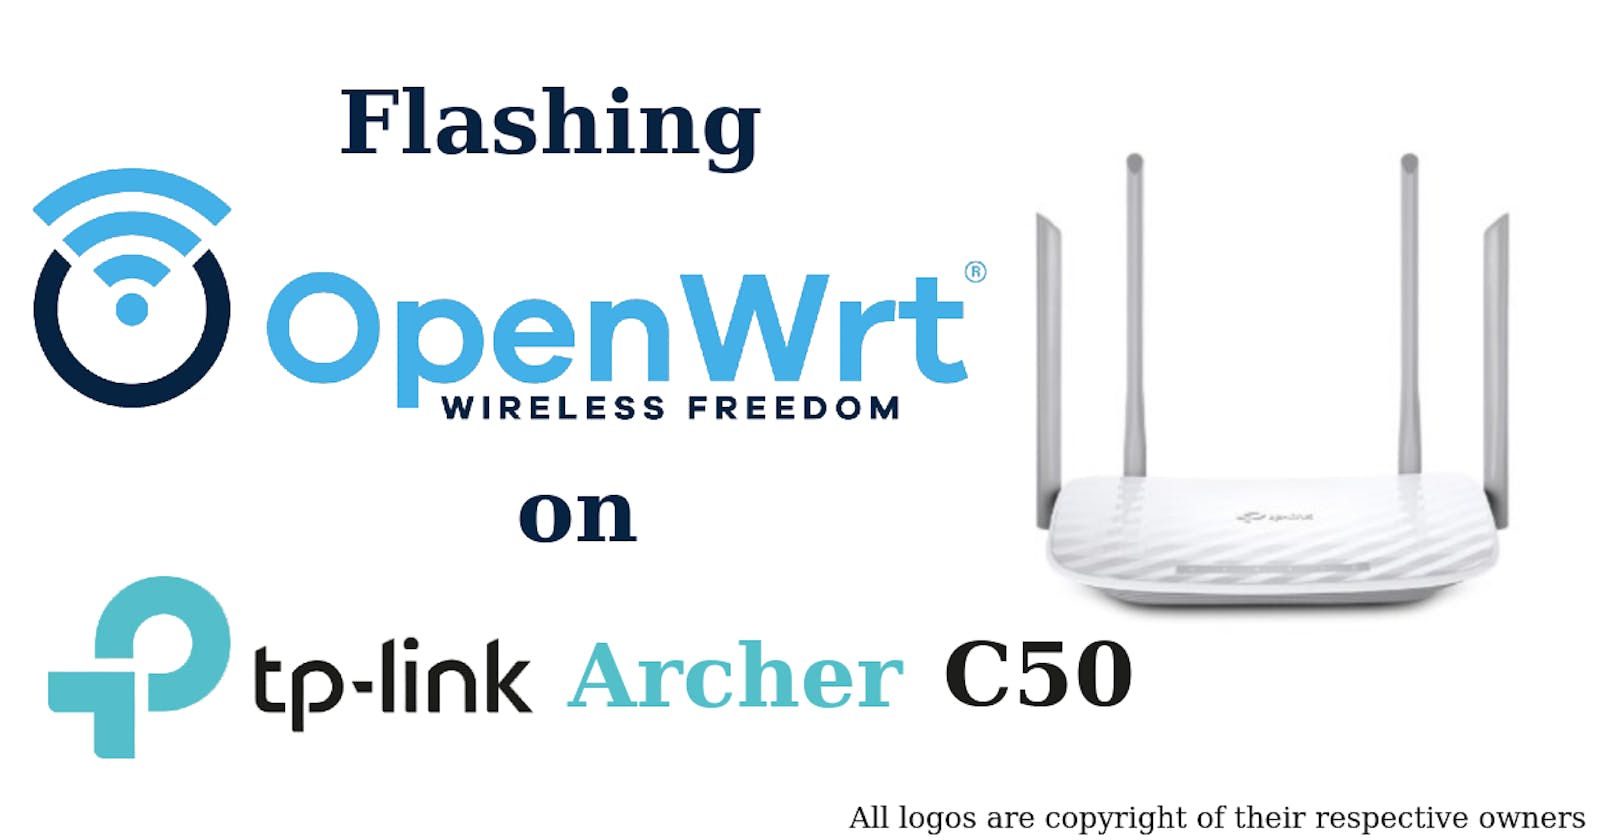 Flashing OpenWrt on TP-Link Archer C50